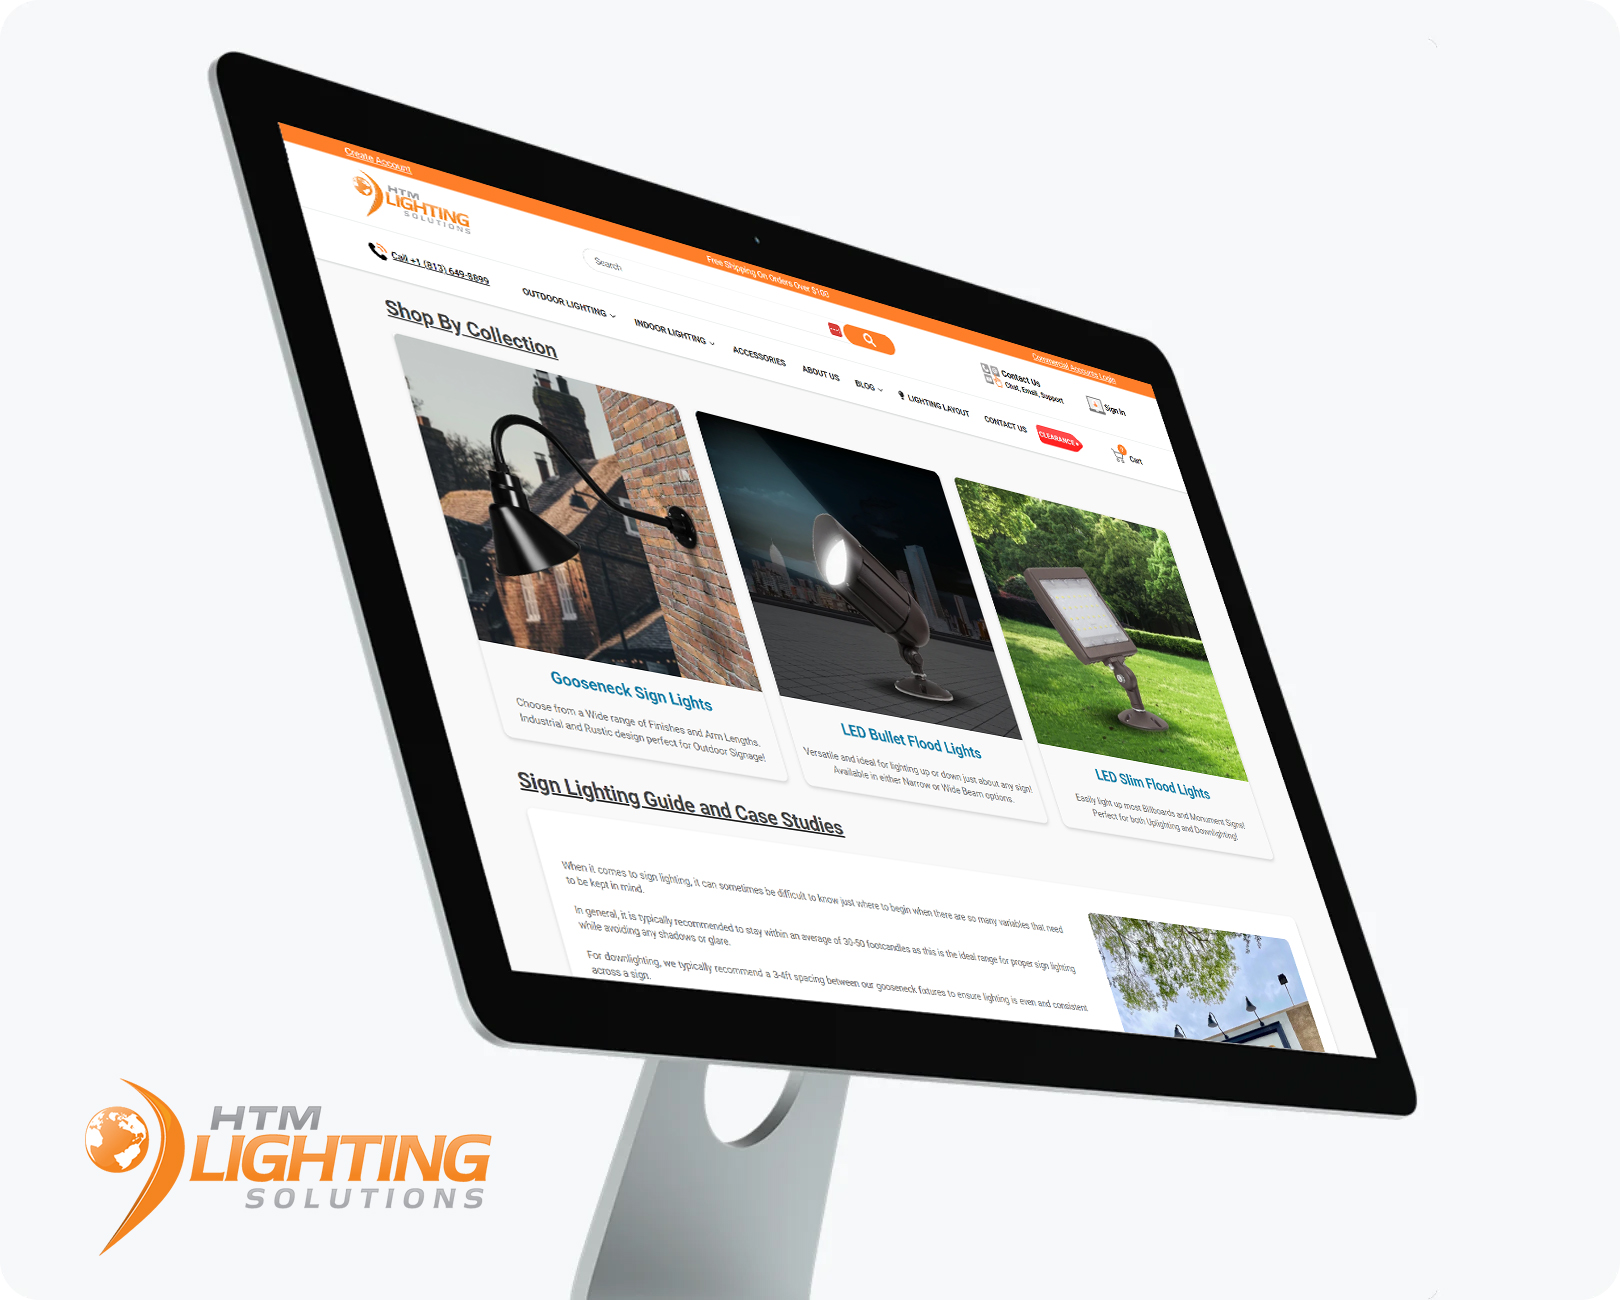 HTM Lighting Solutions